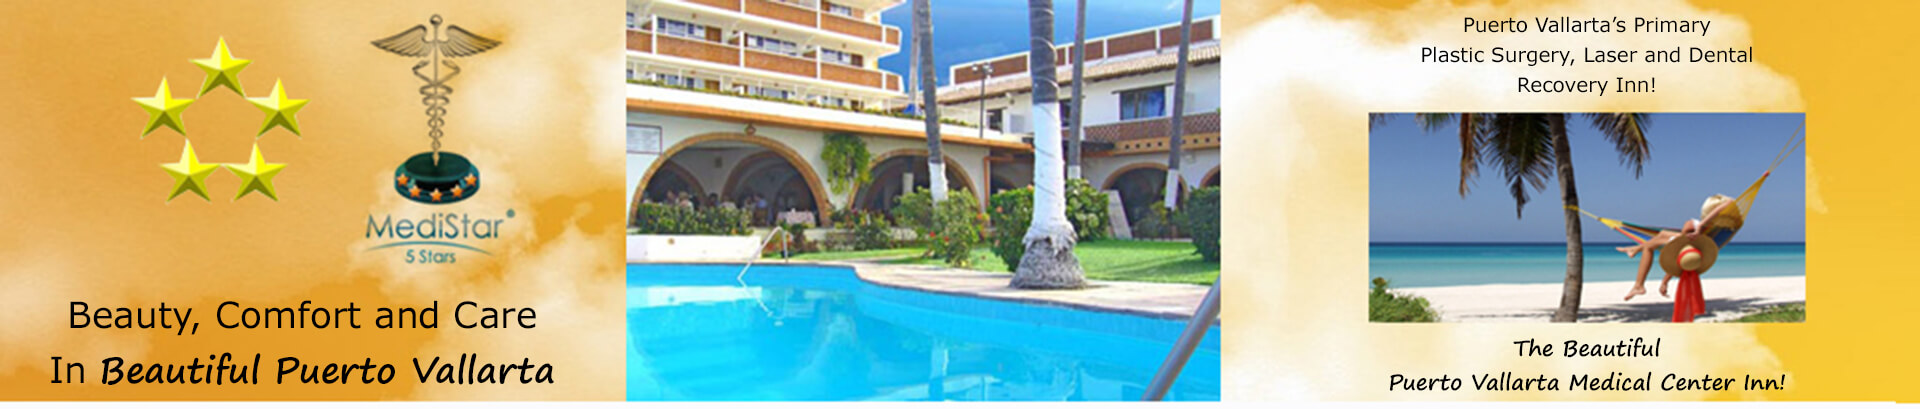 Montage of 3 pictures, showing a logo with medical symbol and 5 Medistars, a photo of a pool, and a woman sitting in a hammock on the beach who is happy with the plastic surgery recovery she had at the Vallarta Medical Center Inn in Puerto Vallarta, Mexico.